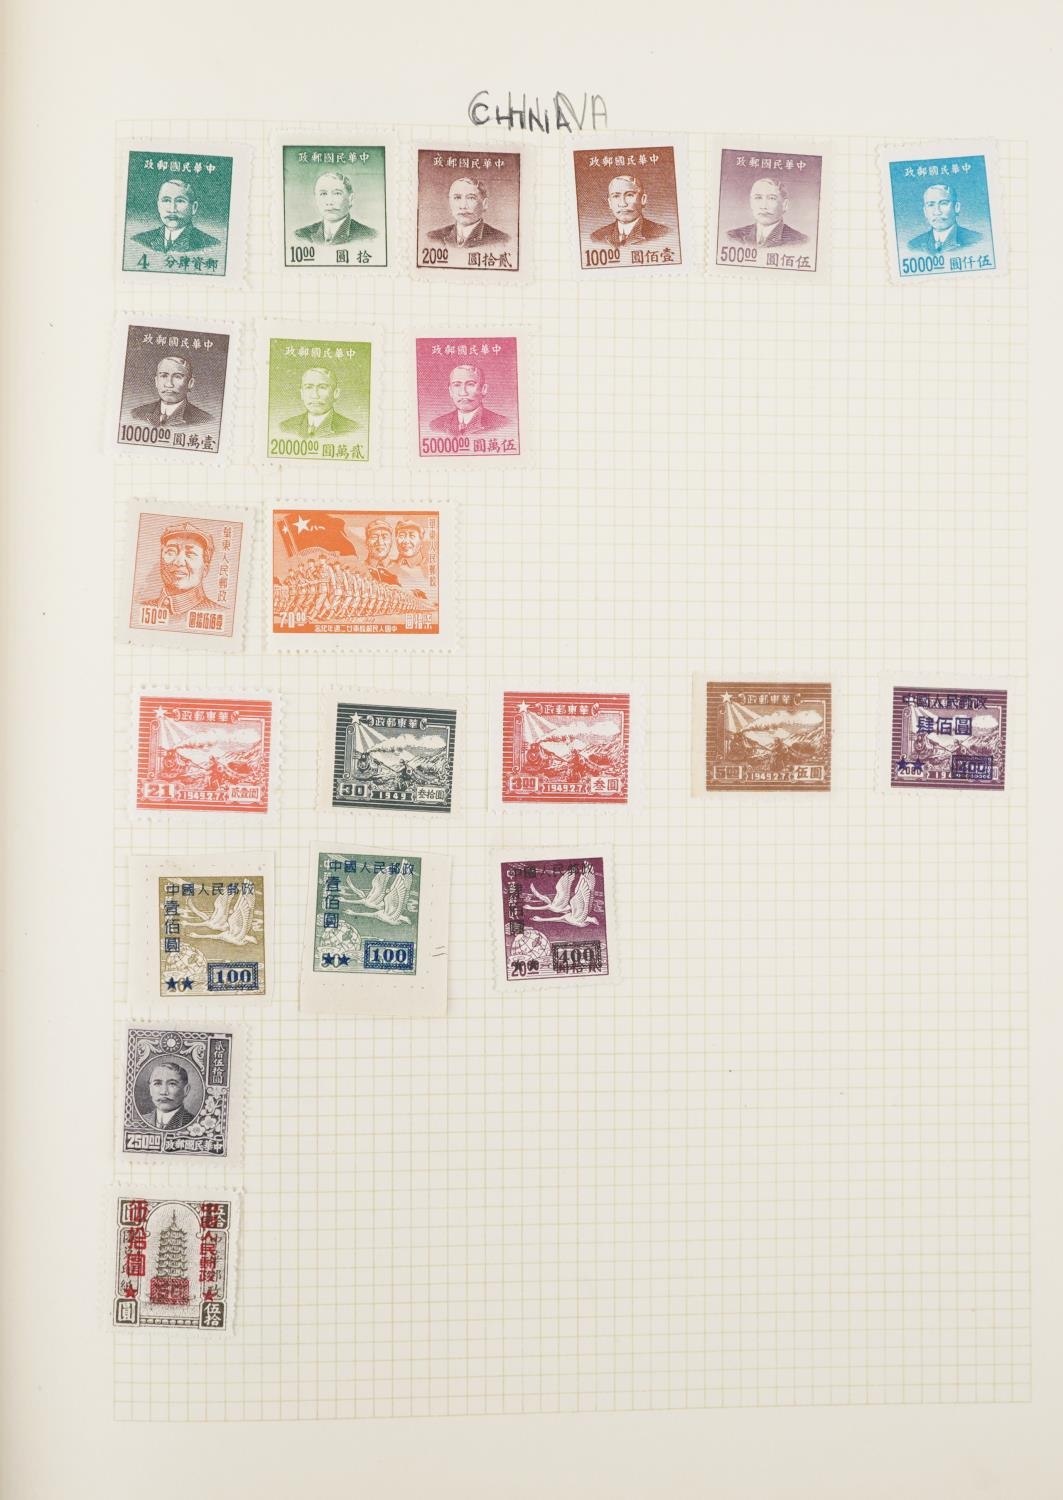 Collection of British and world stamps arranged in two albums including China